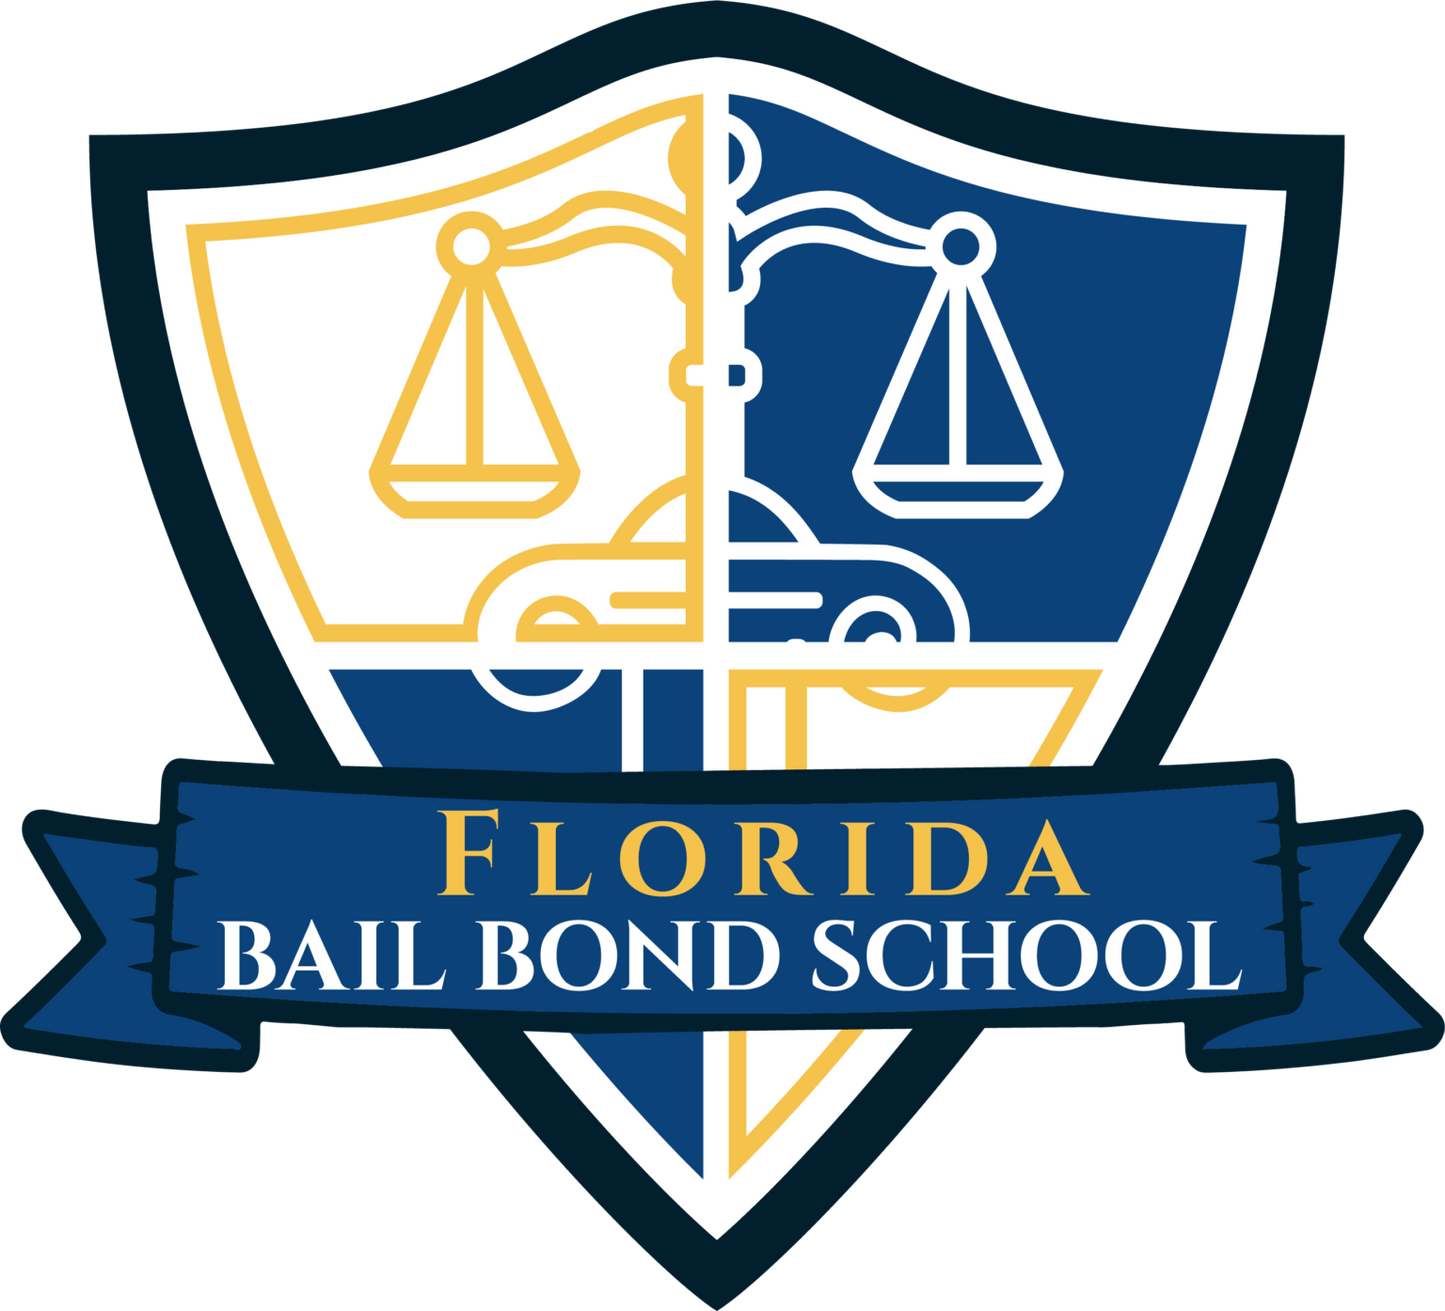 Continuing Education Bail Bonds 5 Hr Law and Ethics Update December 29th 9am-3pm